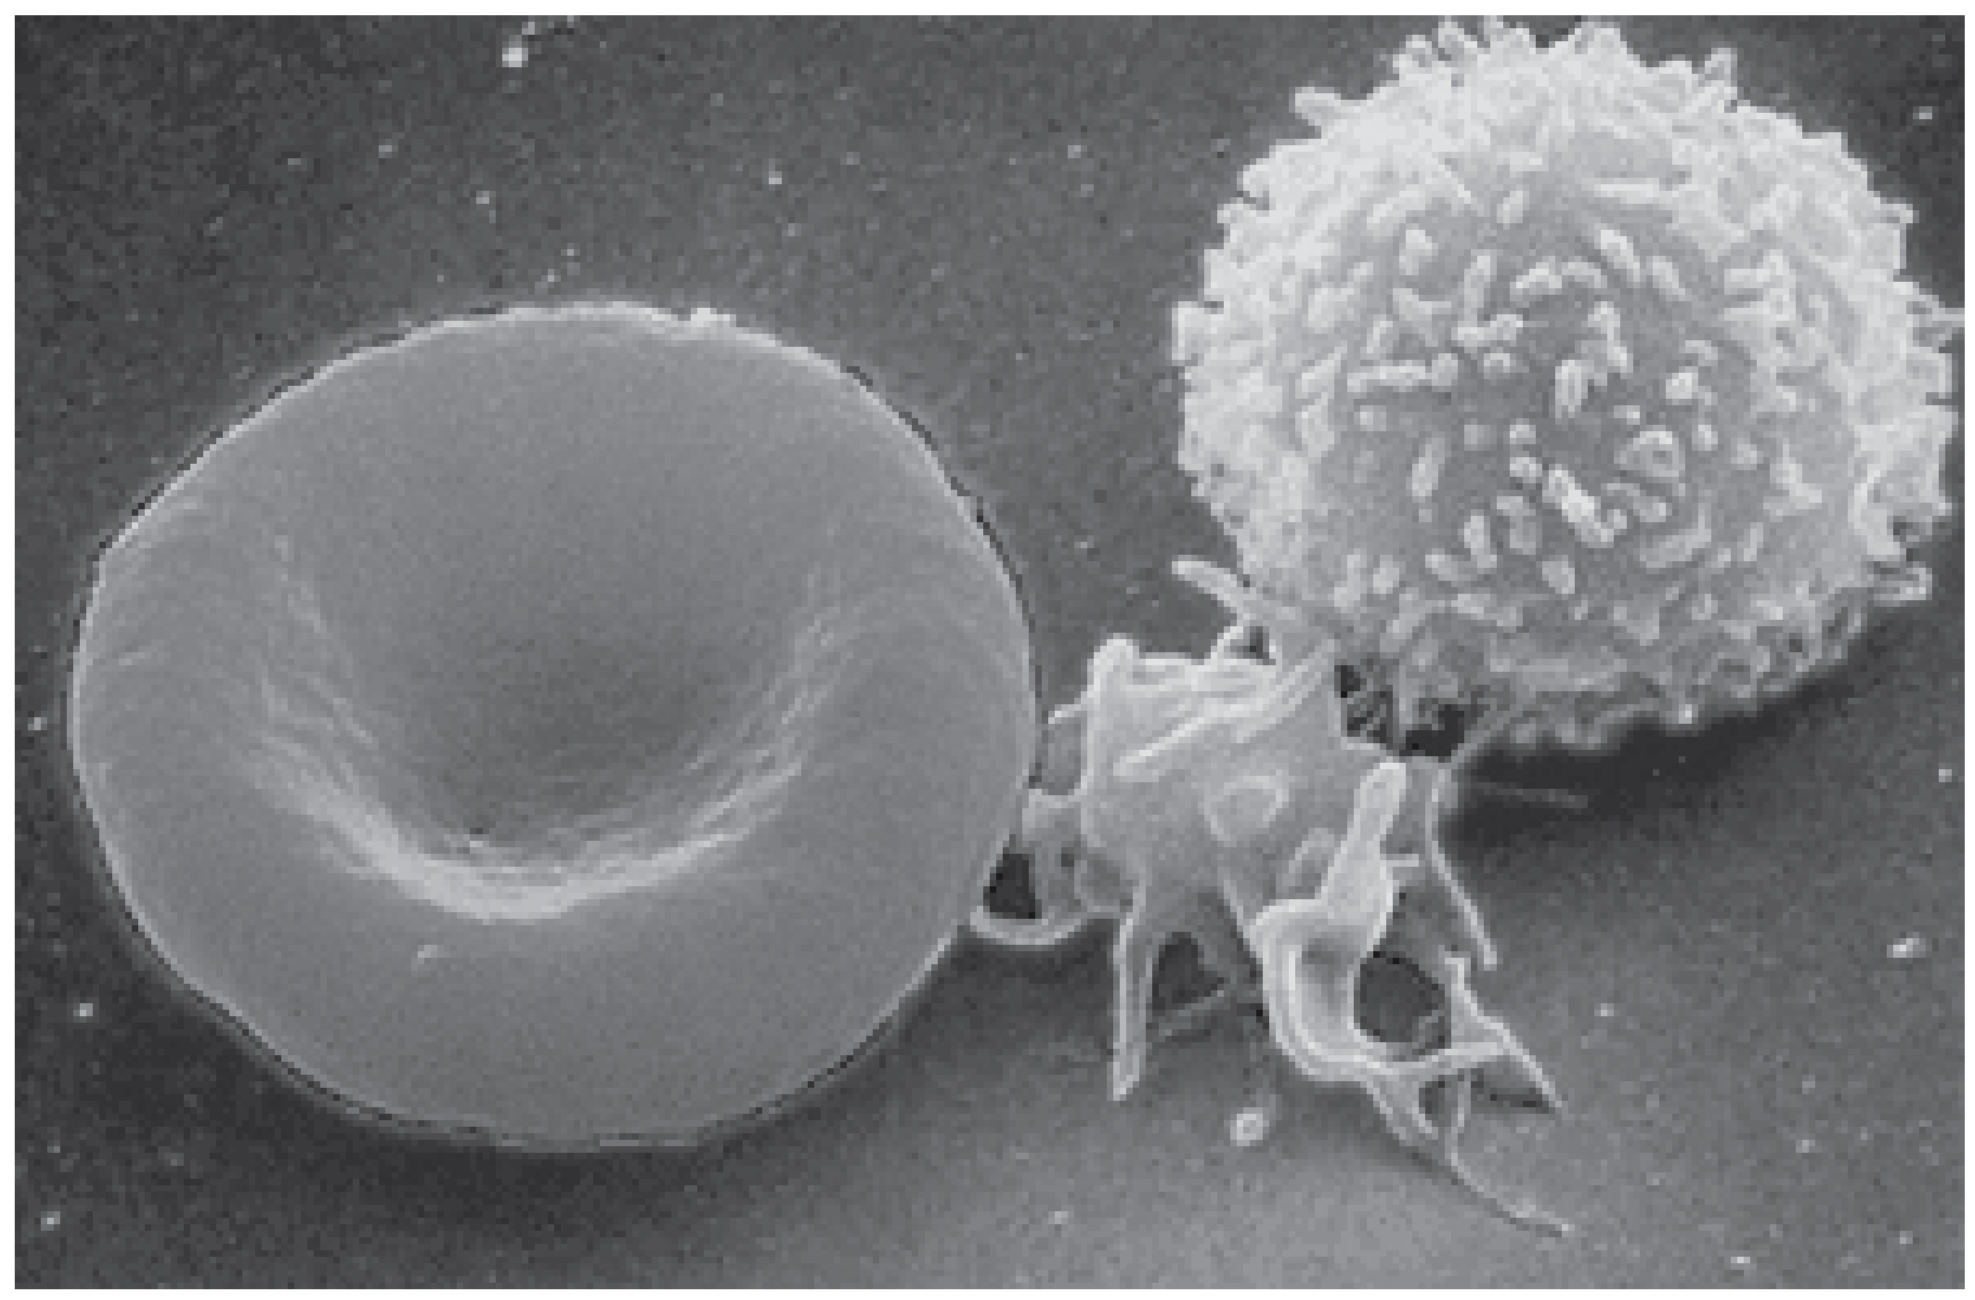 This photo shows a red blood cell and a white blood cell.